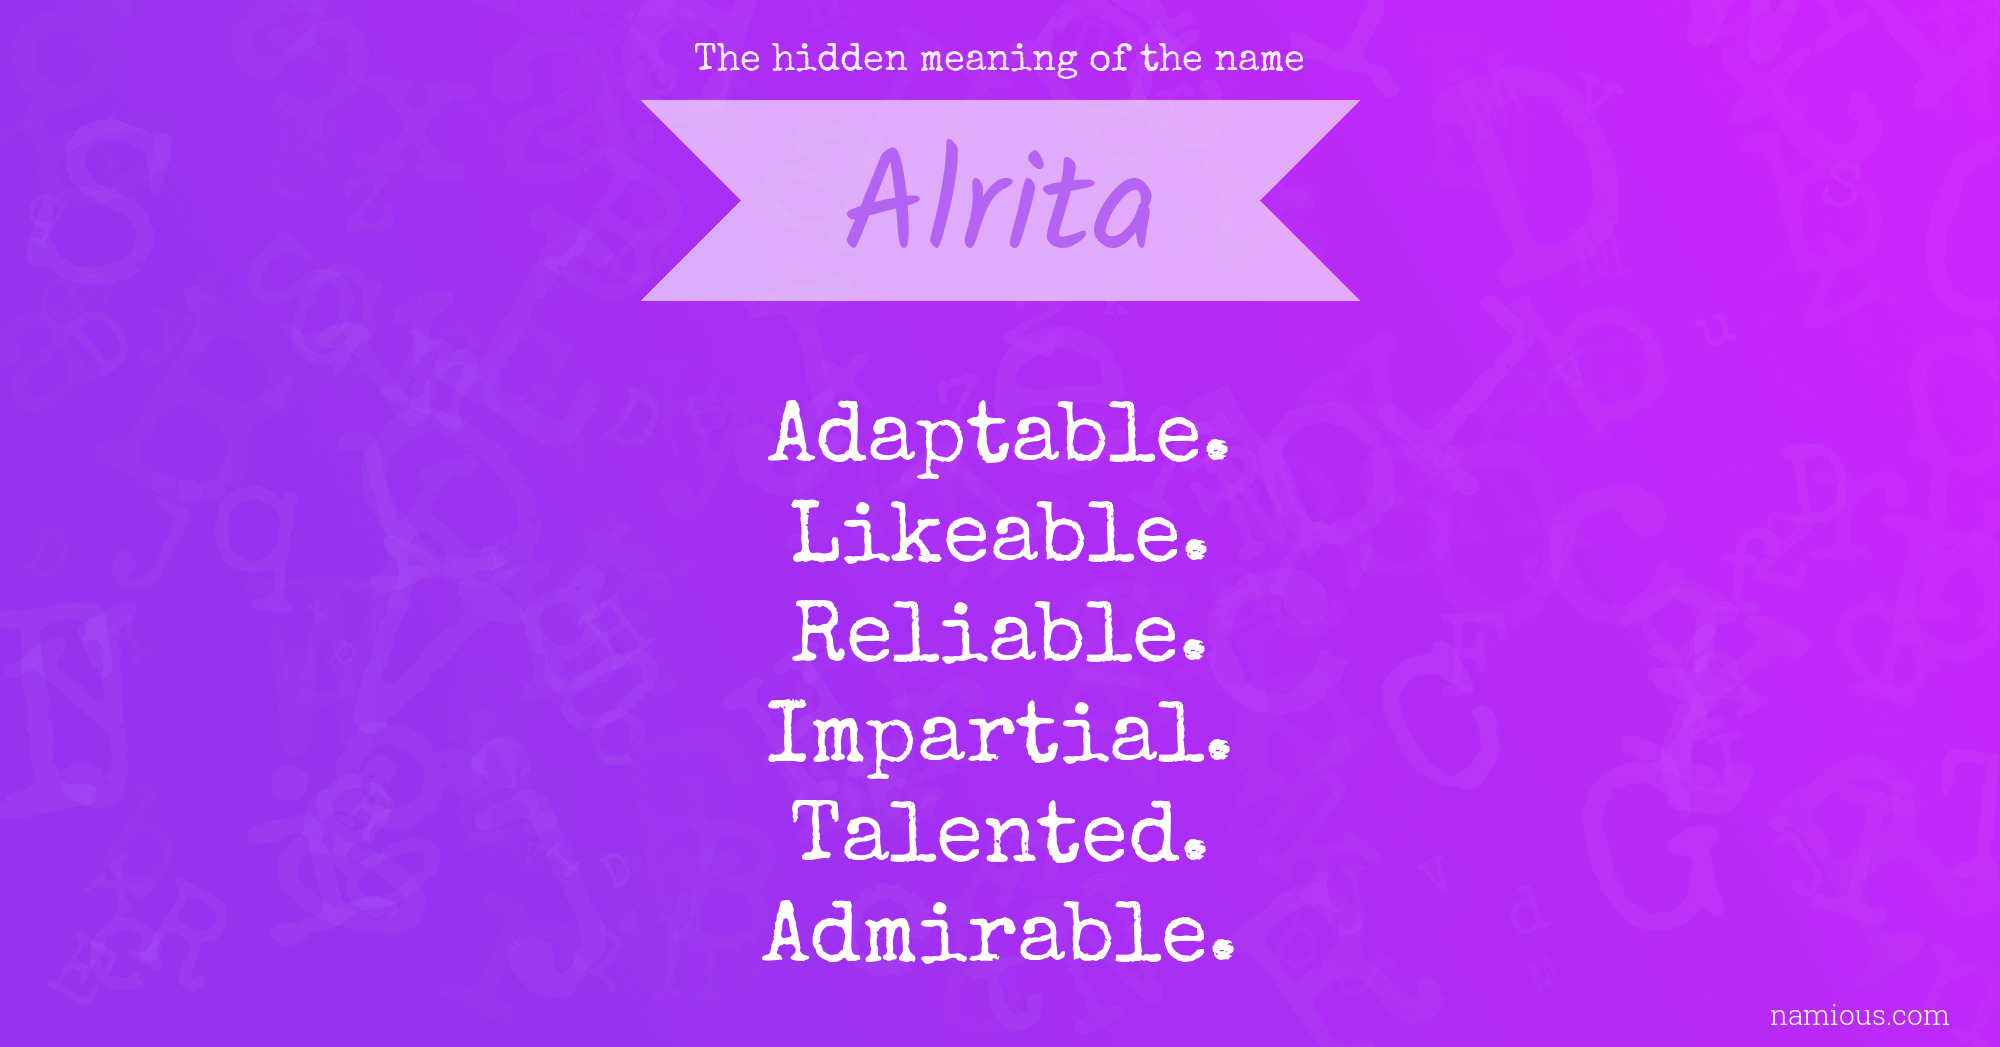 The hidden meaning of the name Alrita